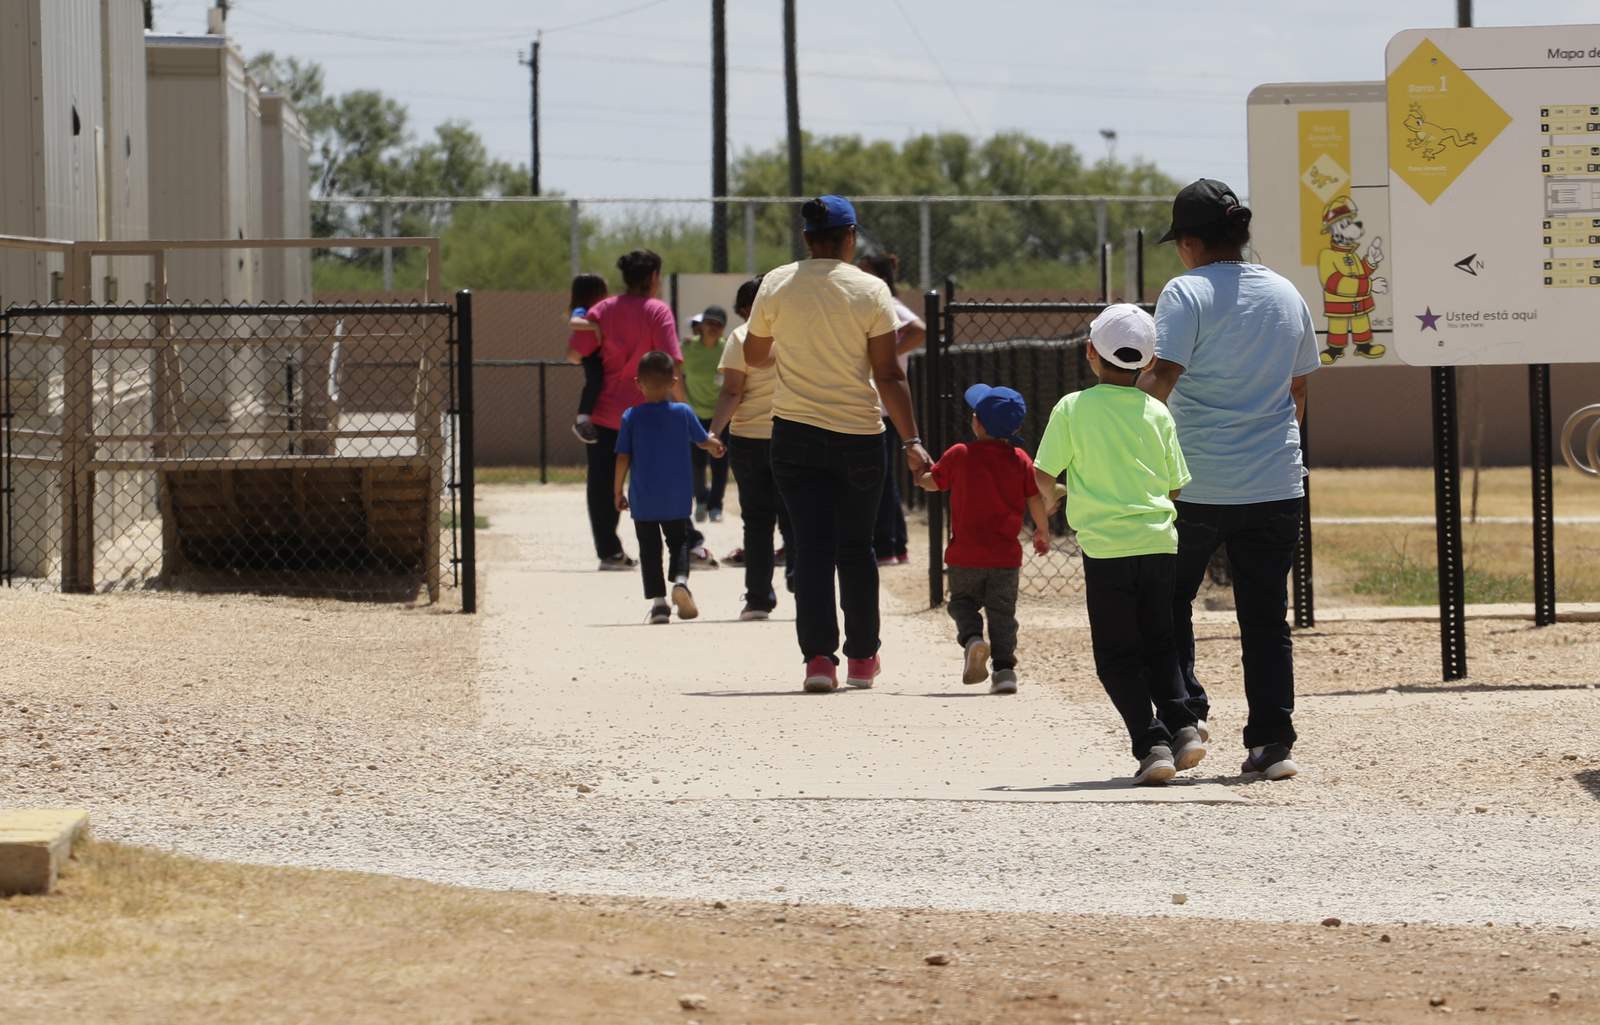 Detained in isolation, migrant families fear catching virus